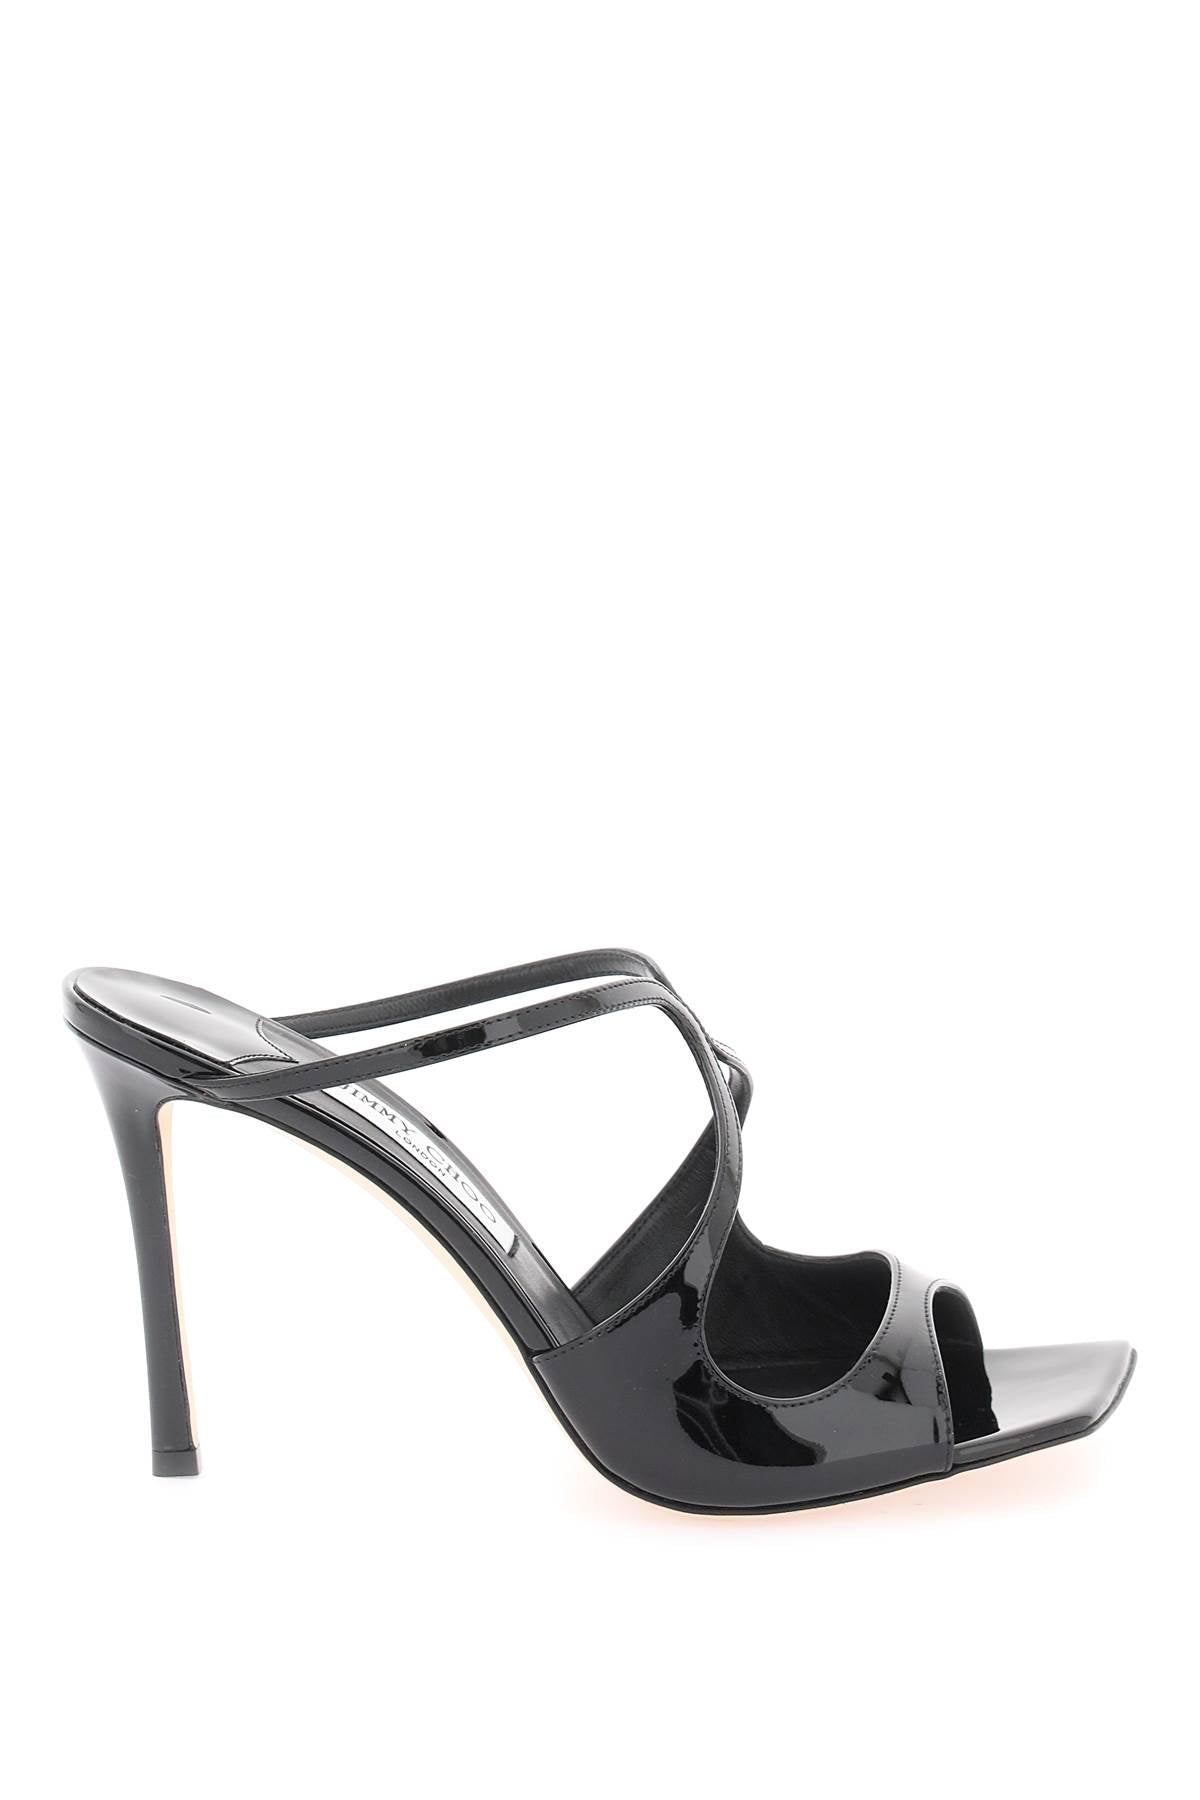 JIMMY CHOO Luxurious Black Patent Leather Sandals for Women